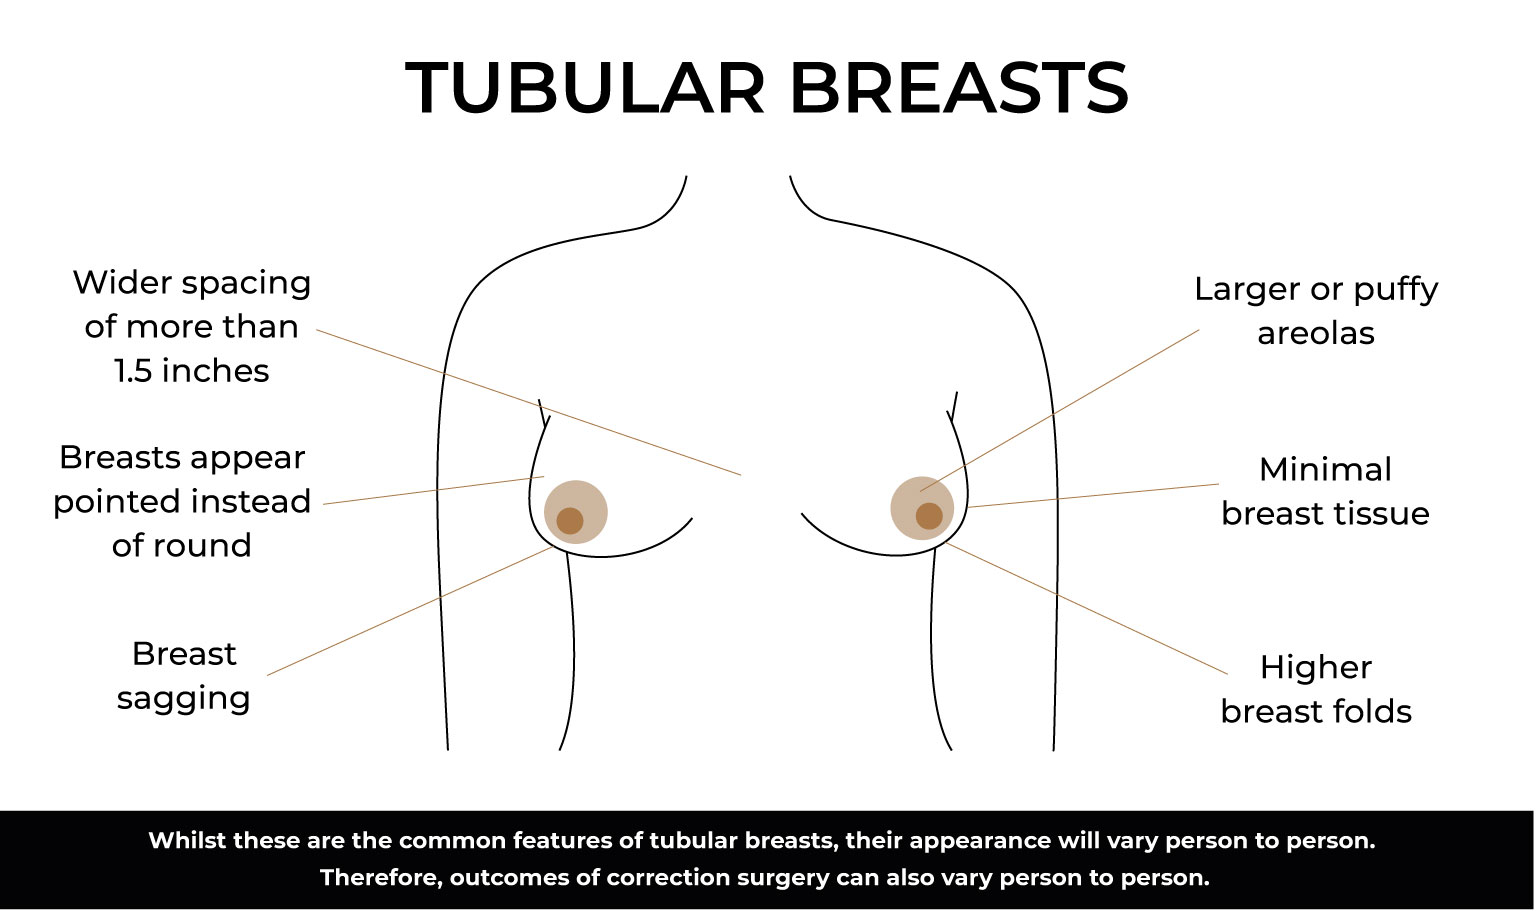 One breast is smaller than the other? No big deal